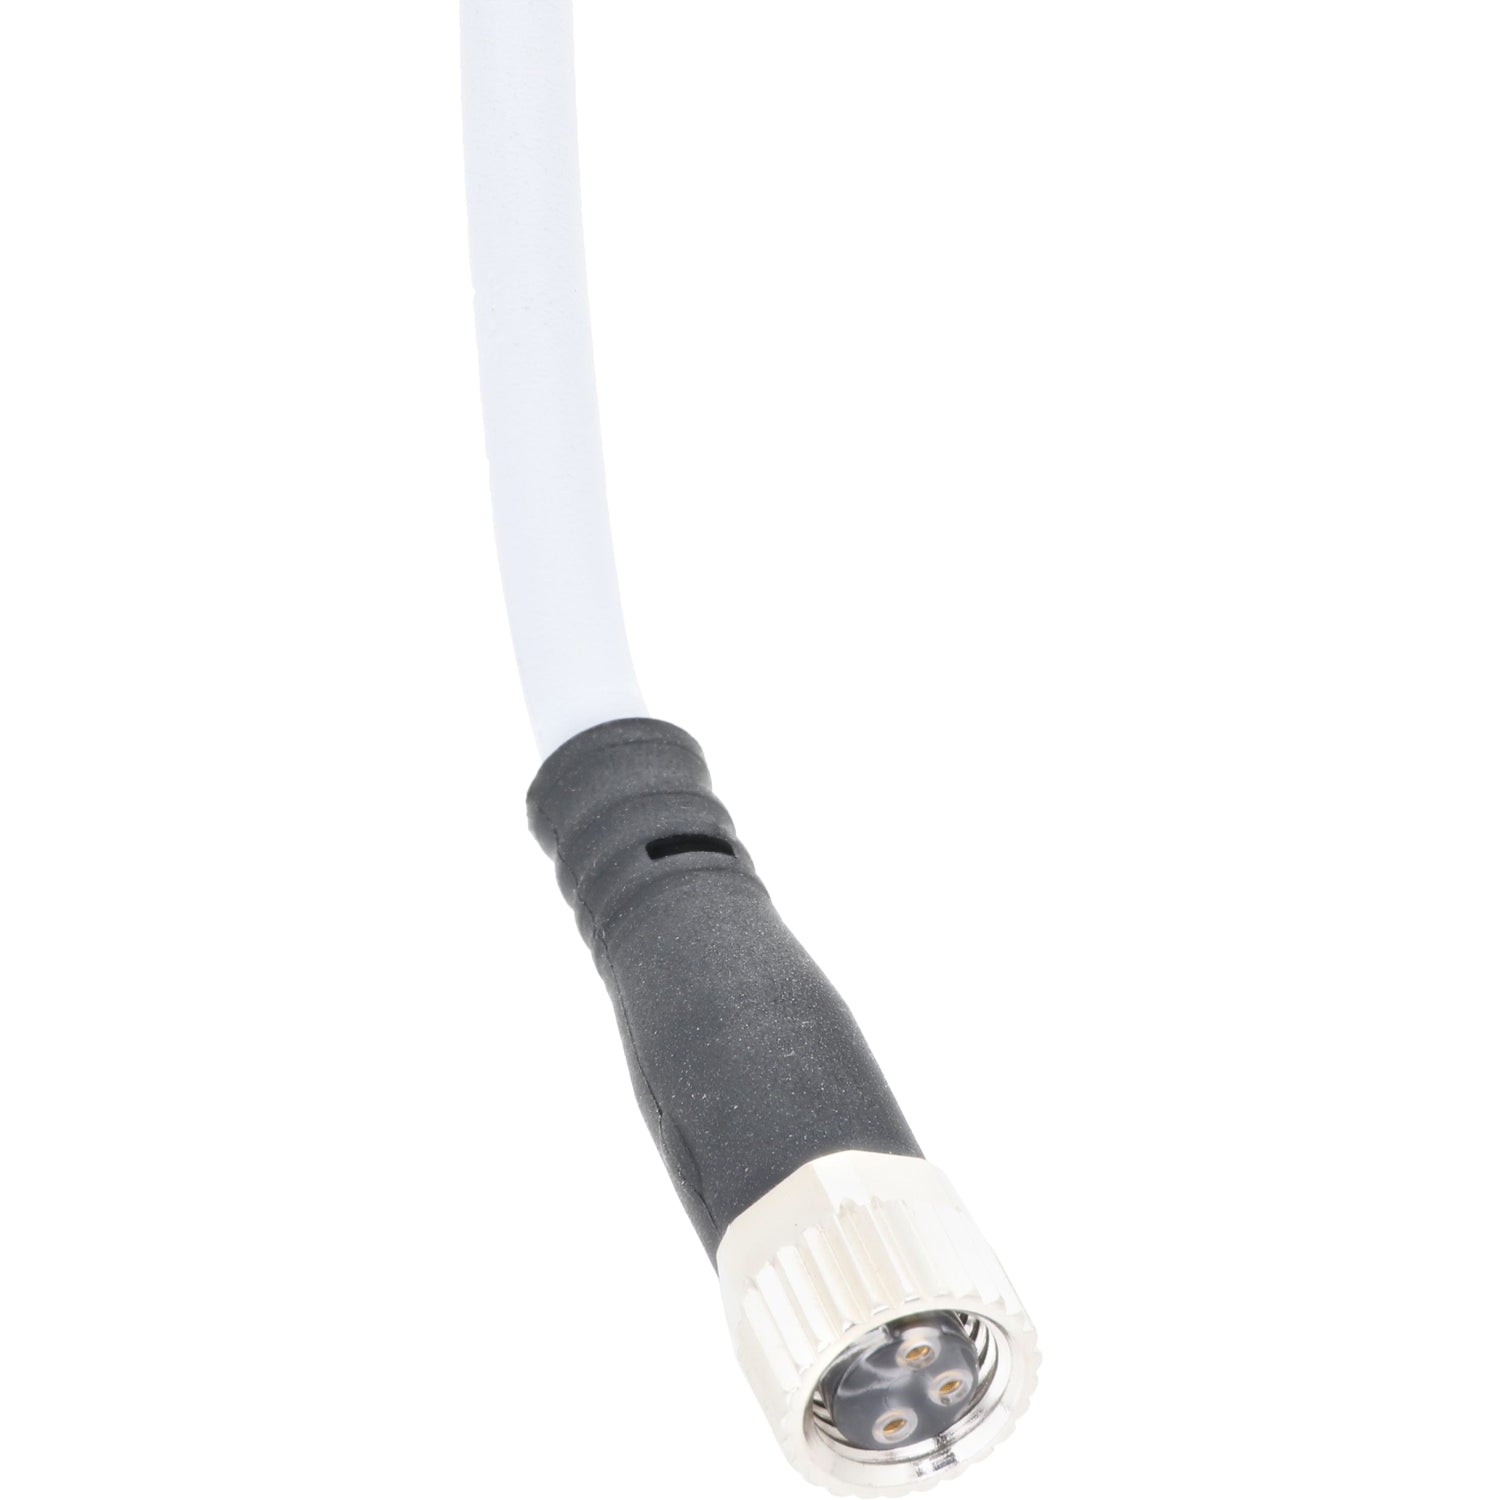 Grey connecting cable with molded female three pin plug. Cable is shown on white background.